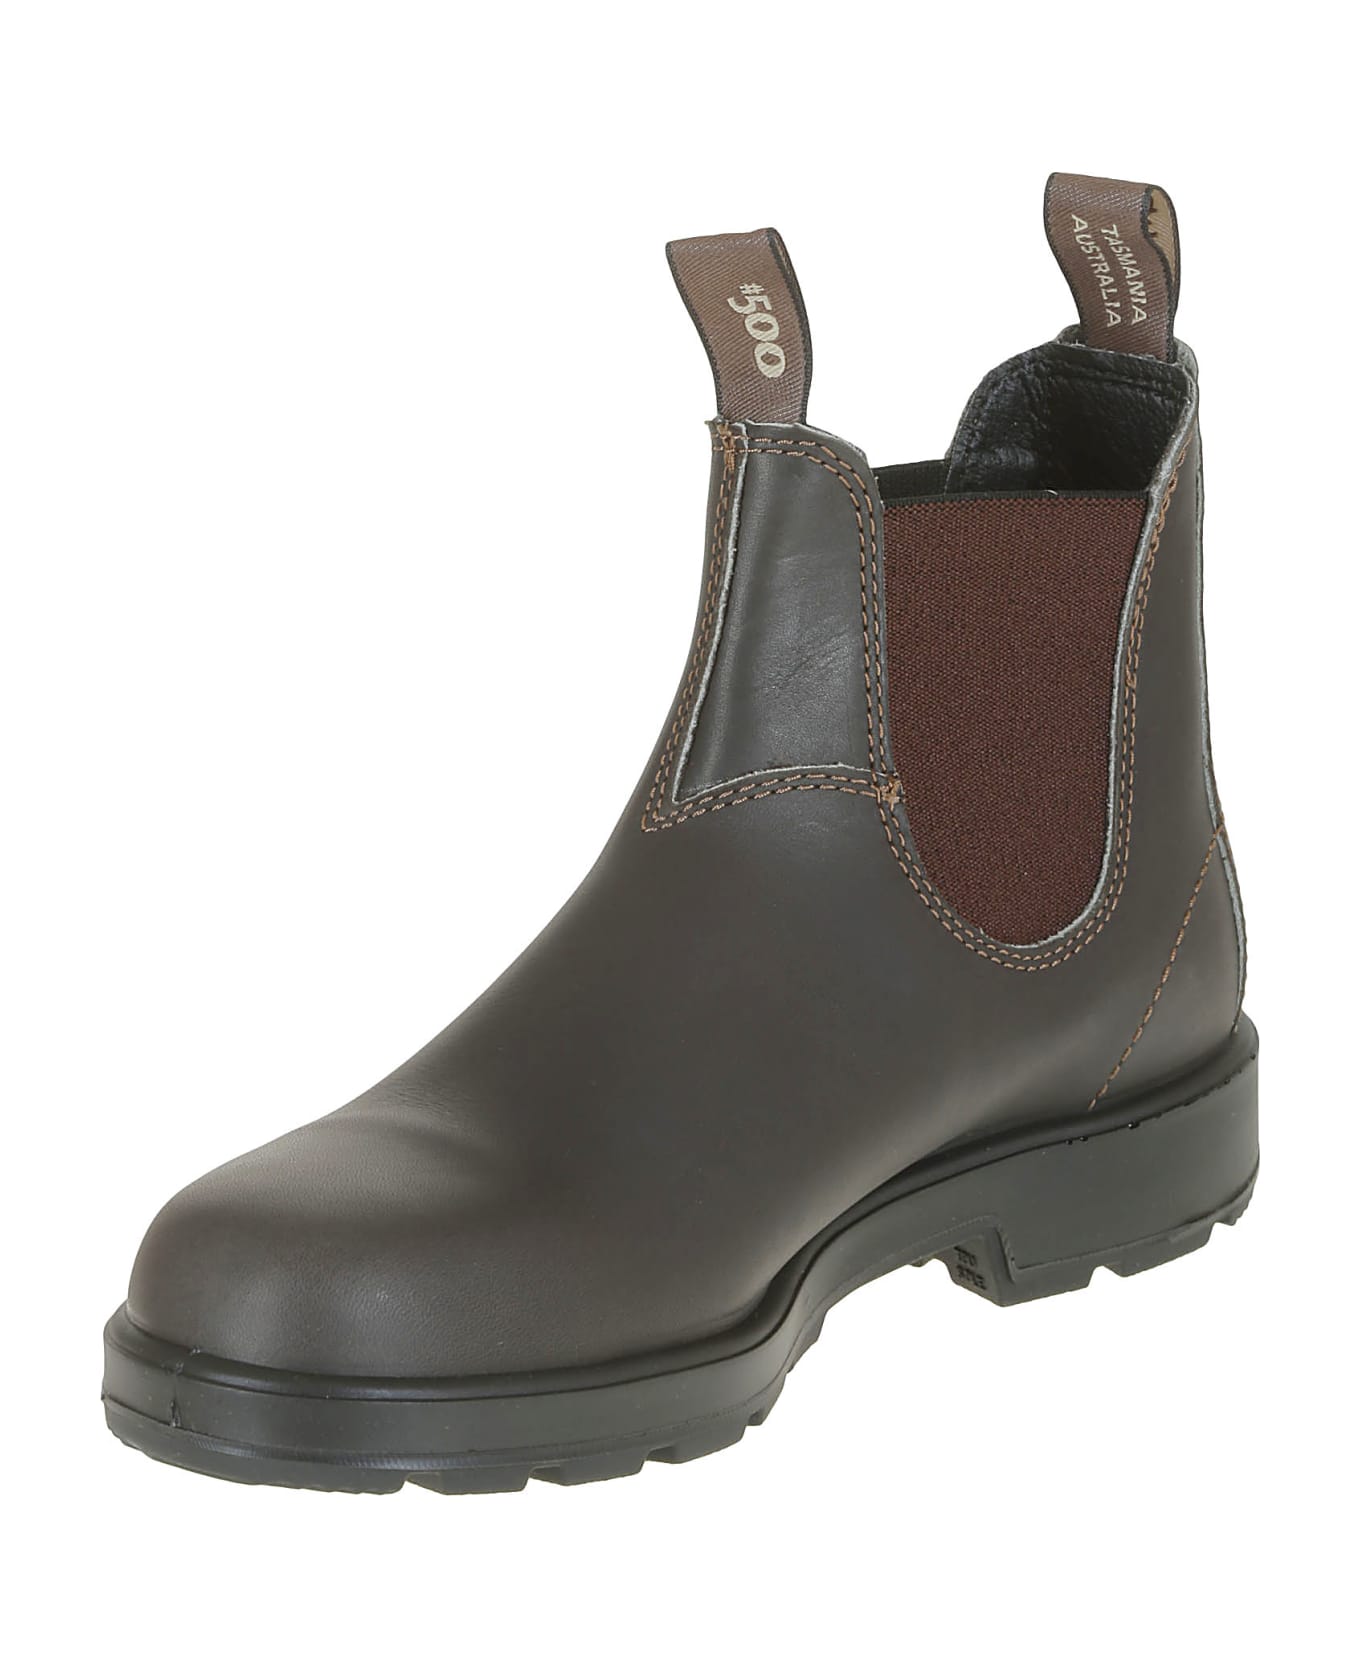 Blundstone 500 Stout Brown Leather - Stout Brown & Brown ブーツ